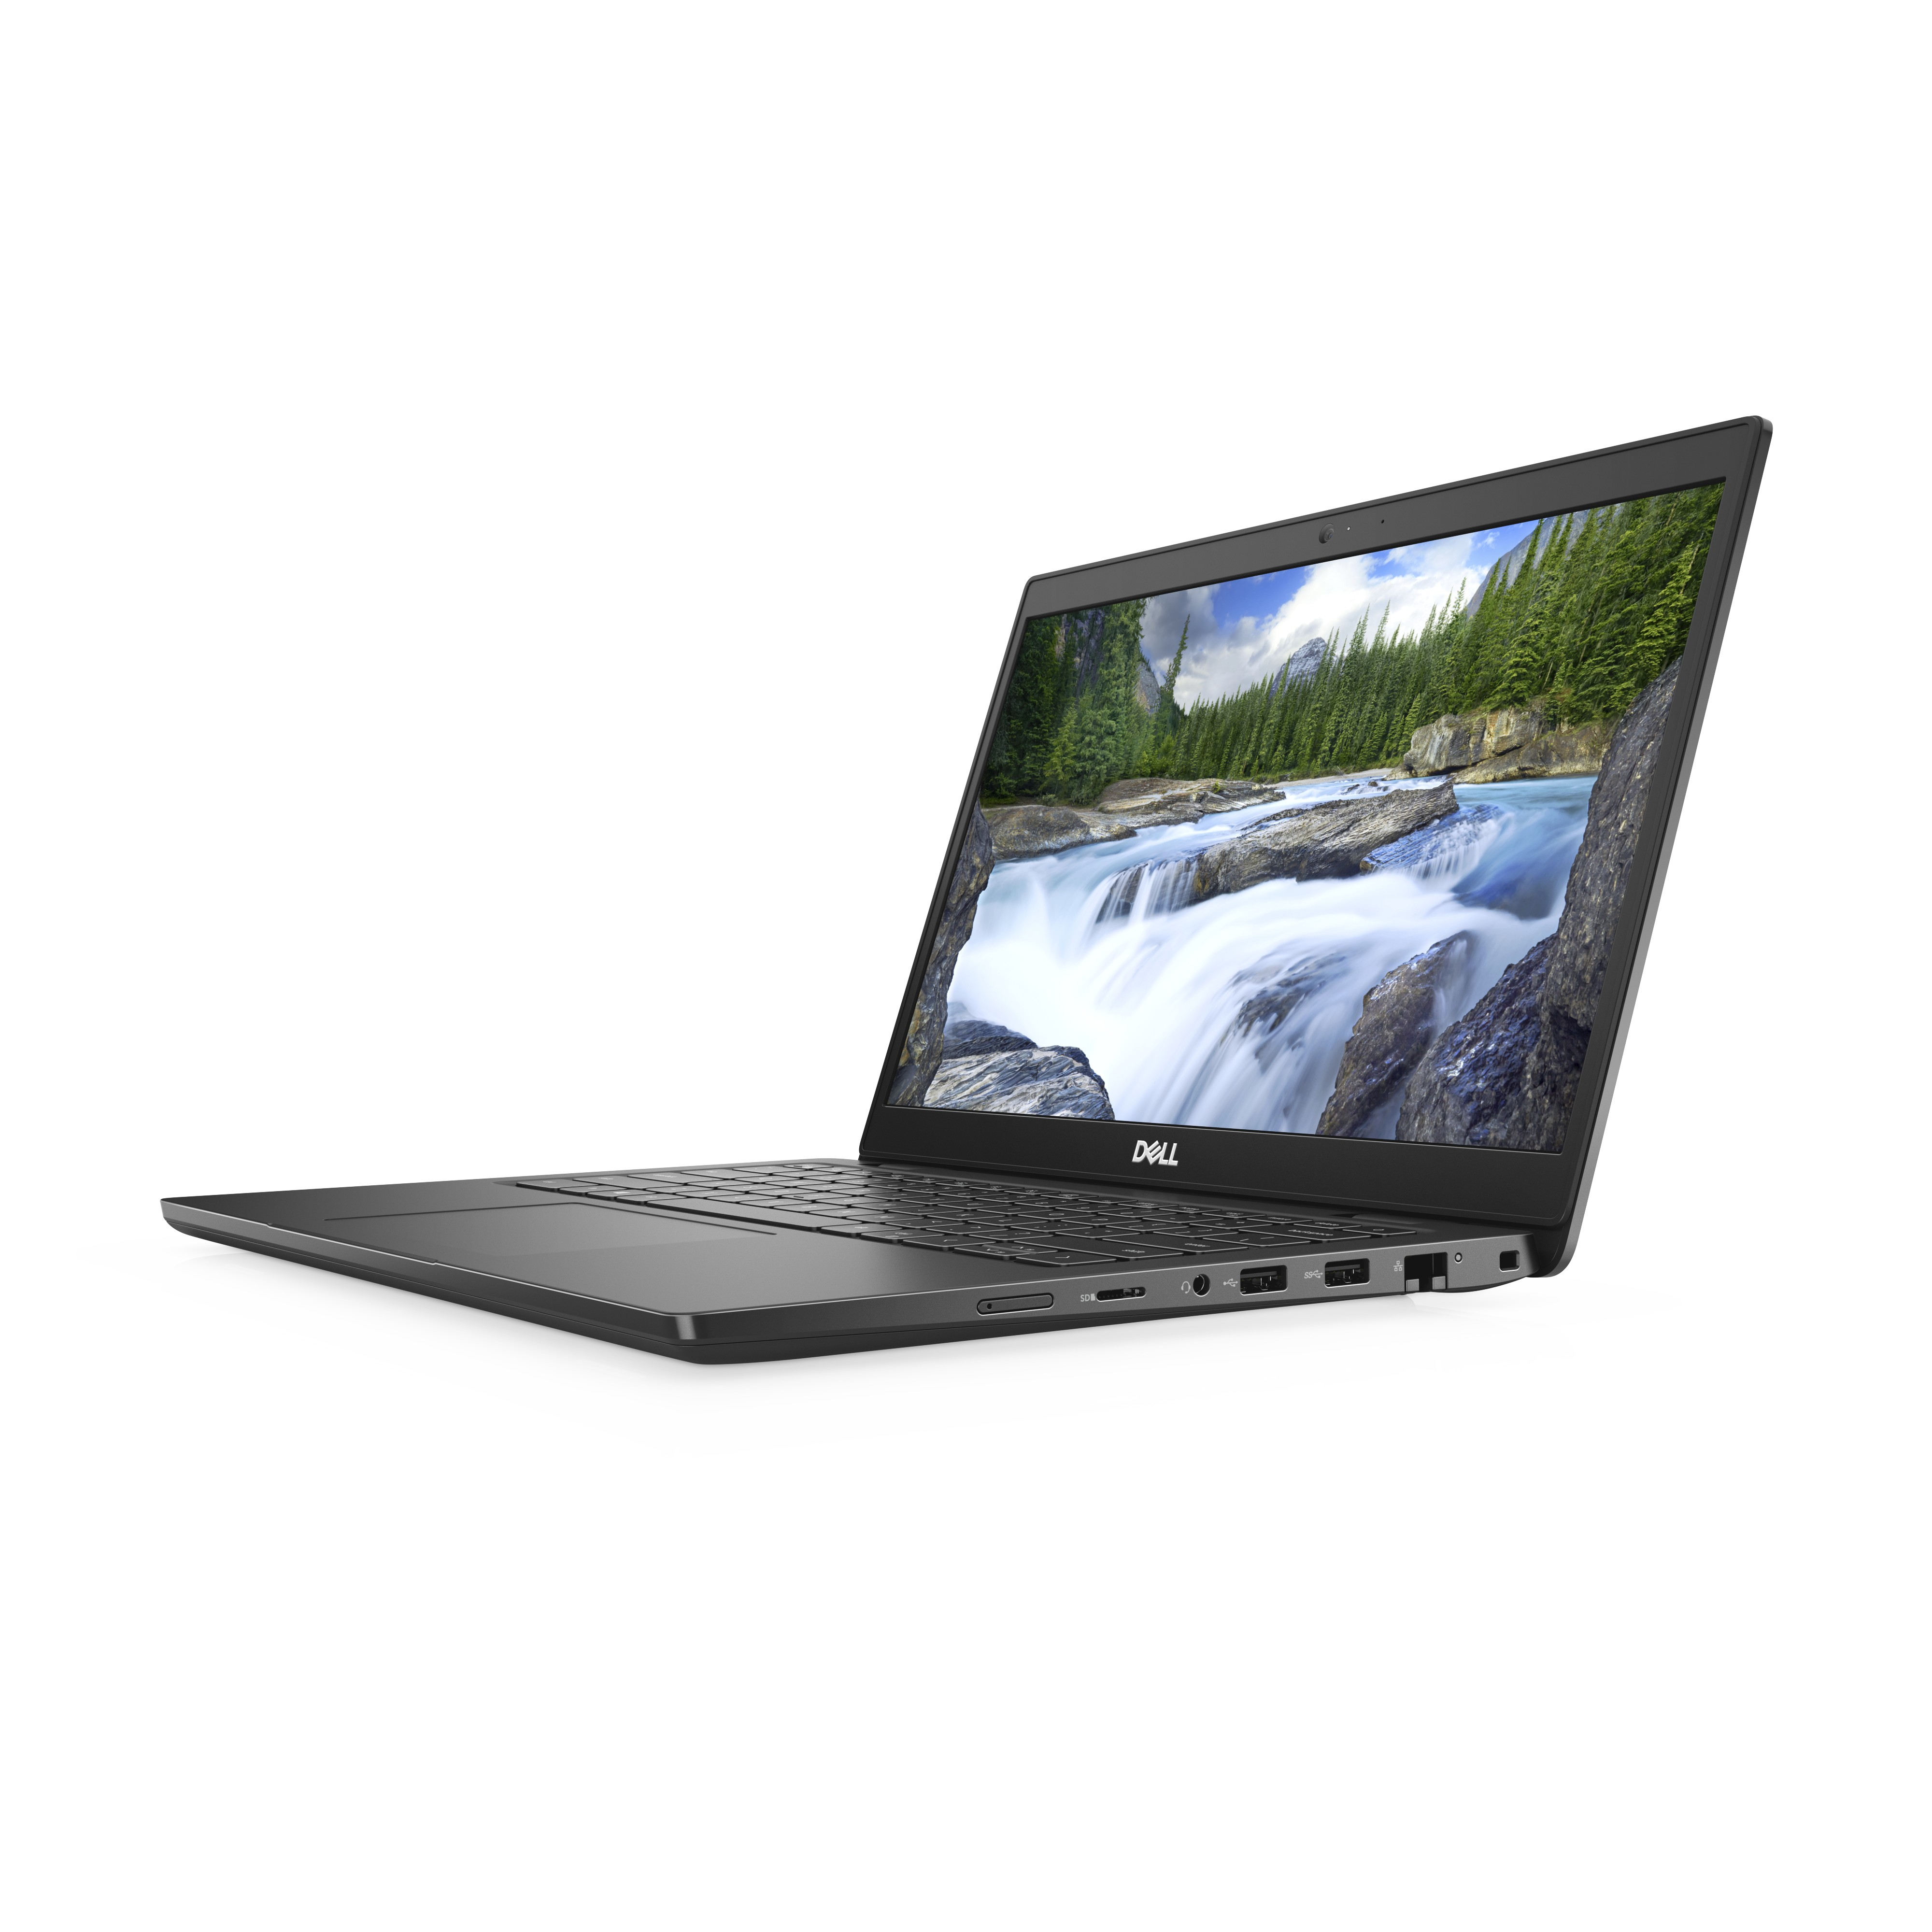 Latitude 3420 - Core I3 1115g4 / 3 Ghz - Win 10 Pro 64-bit - Uhd Graphics - 4 Gb Ram - 128 Gb Ssd Nvme, Class 35 - 14" Tn 1366 X 768 (hd) - Wi-fi 6 - With 1 Year Hardware Service With Onsite/in-home - image 2 of 5